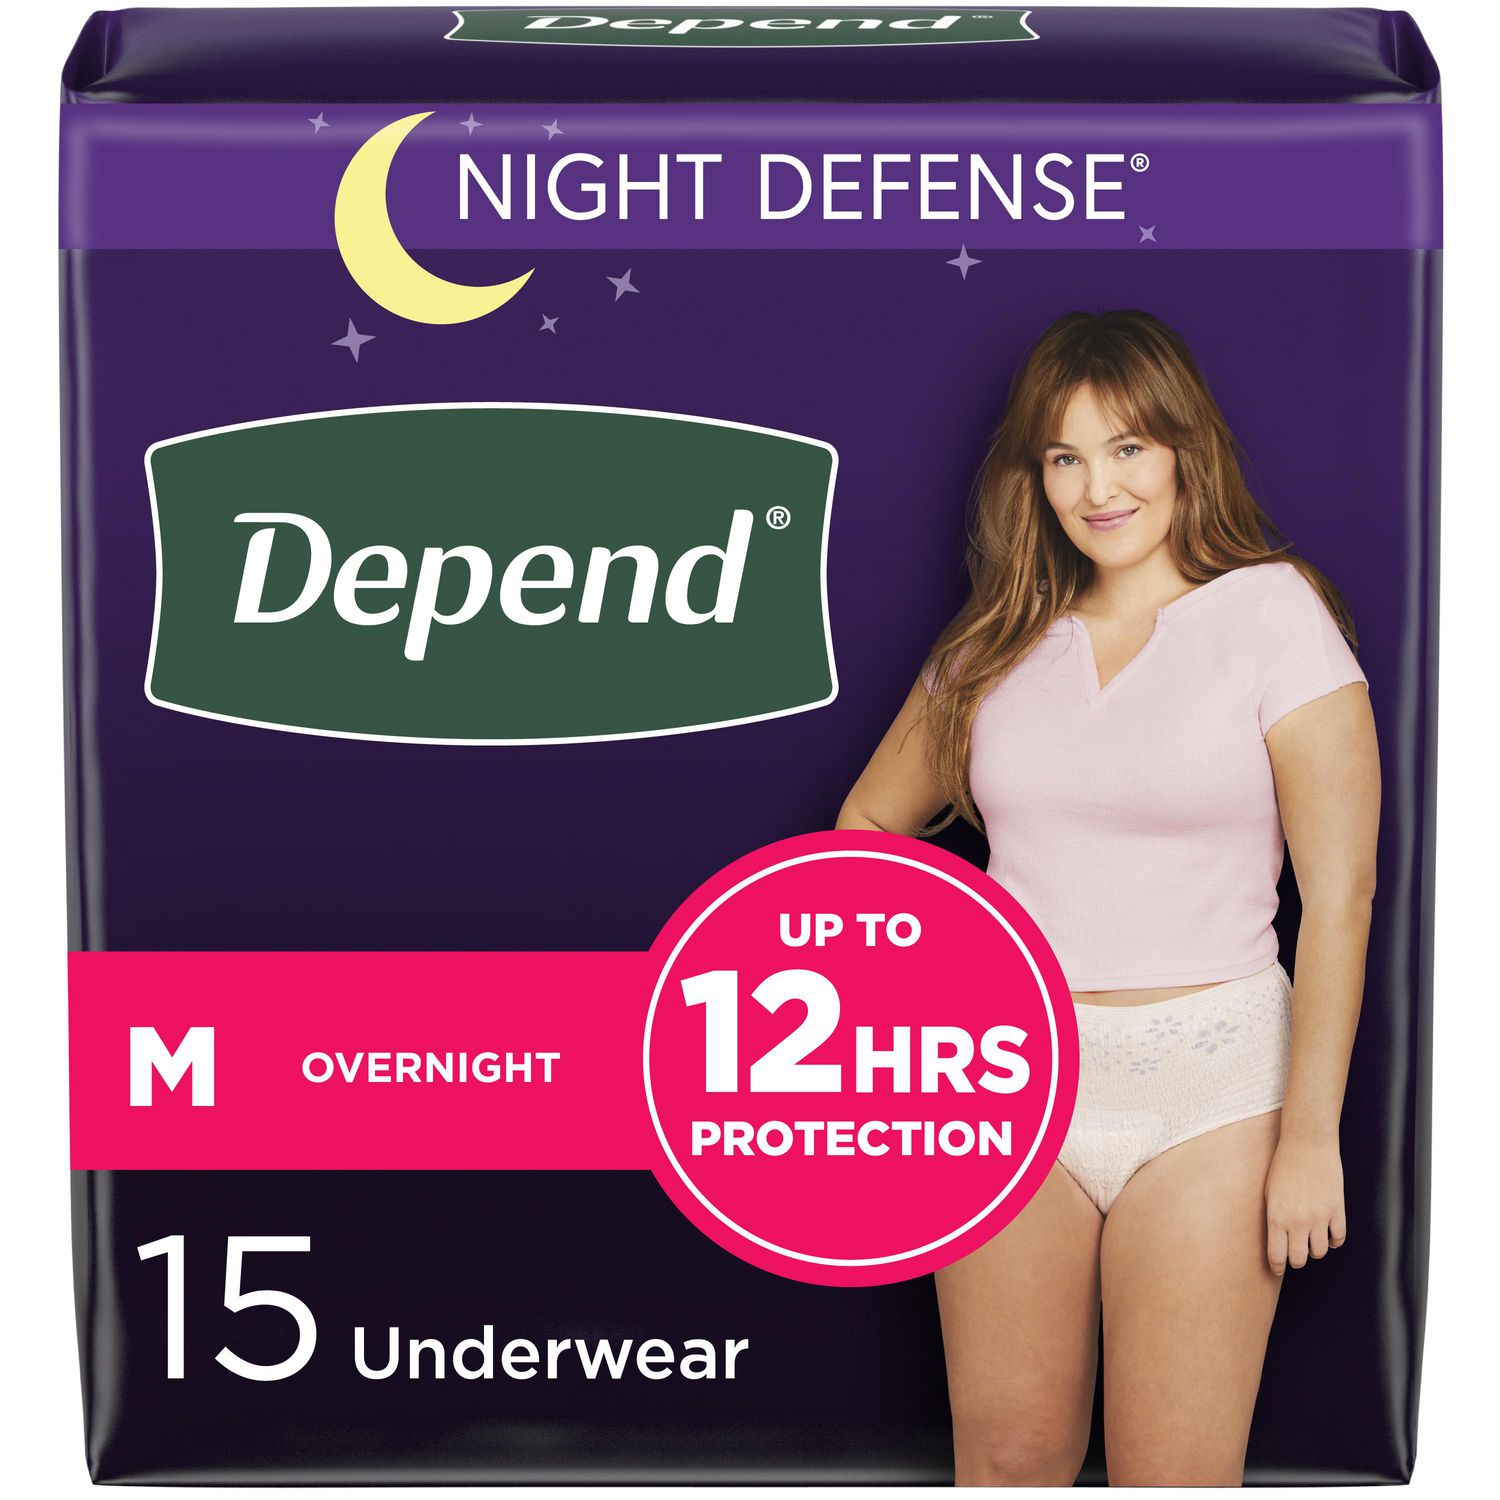 Depend Night Defense Adult Incontinence Underwear for Women, Overnight, M,  Blush, 15 Count 